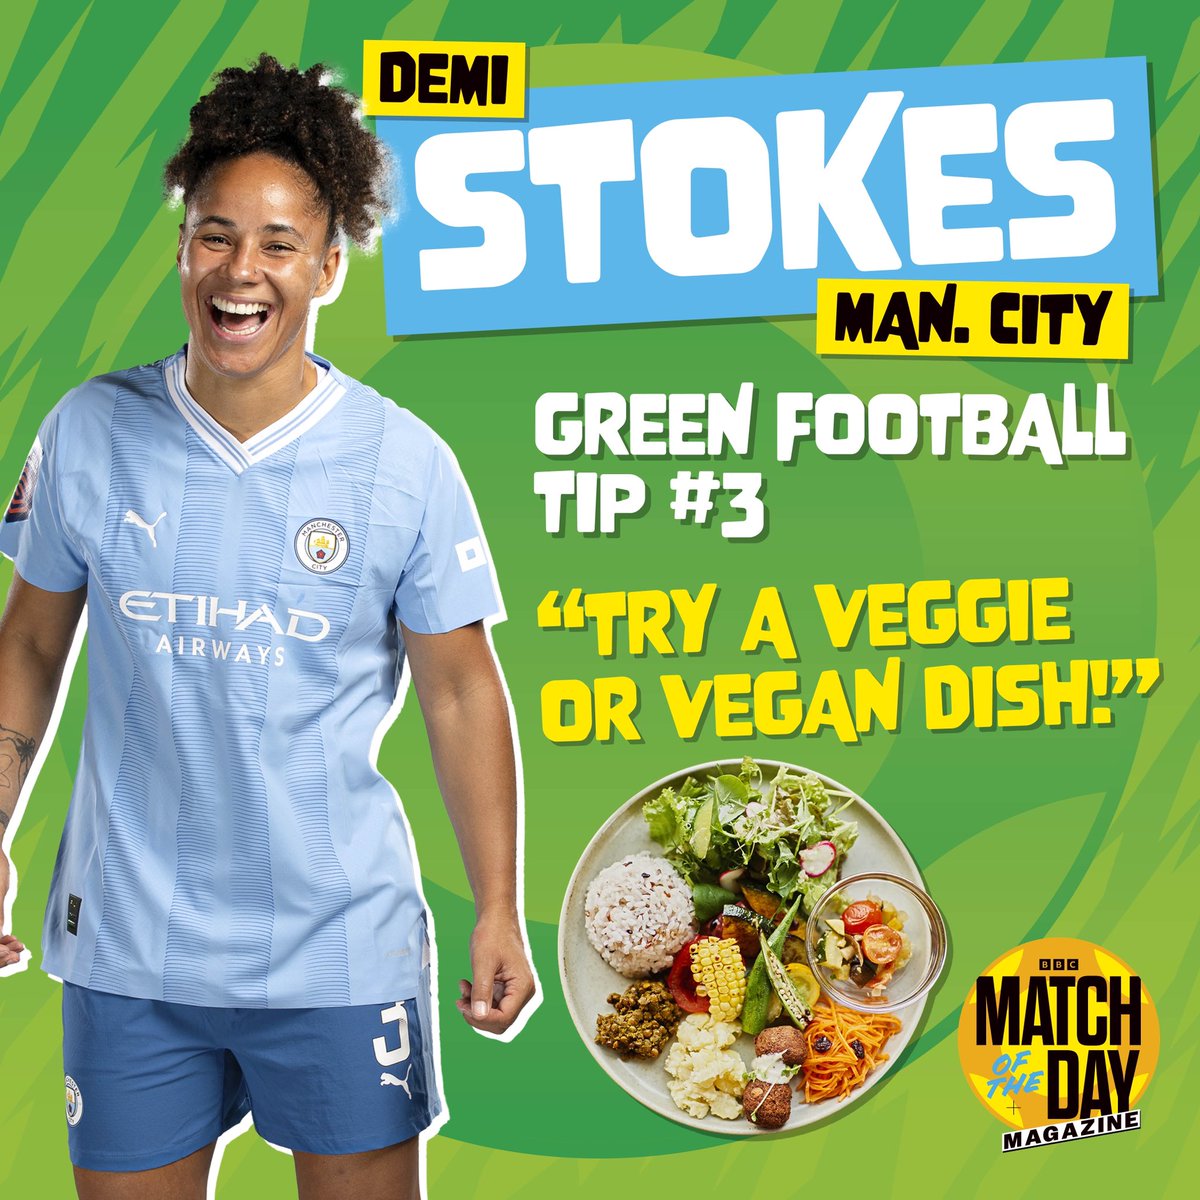 🌎 This weekend is Green Football Weekend - which is when football plays hard to protect the planet! So, we asked Lioness and Man. City defender @demistokes for three ways we can be a bit greener this weekend too! ✅